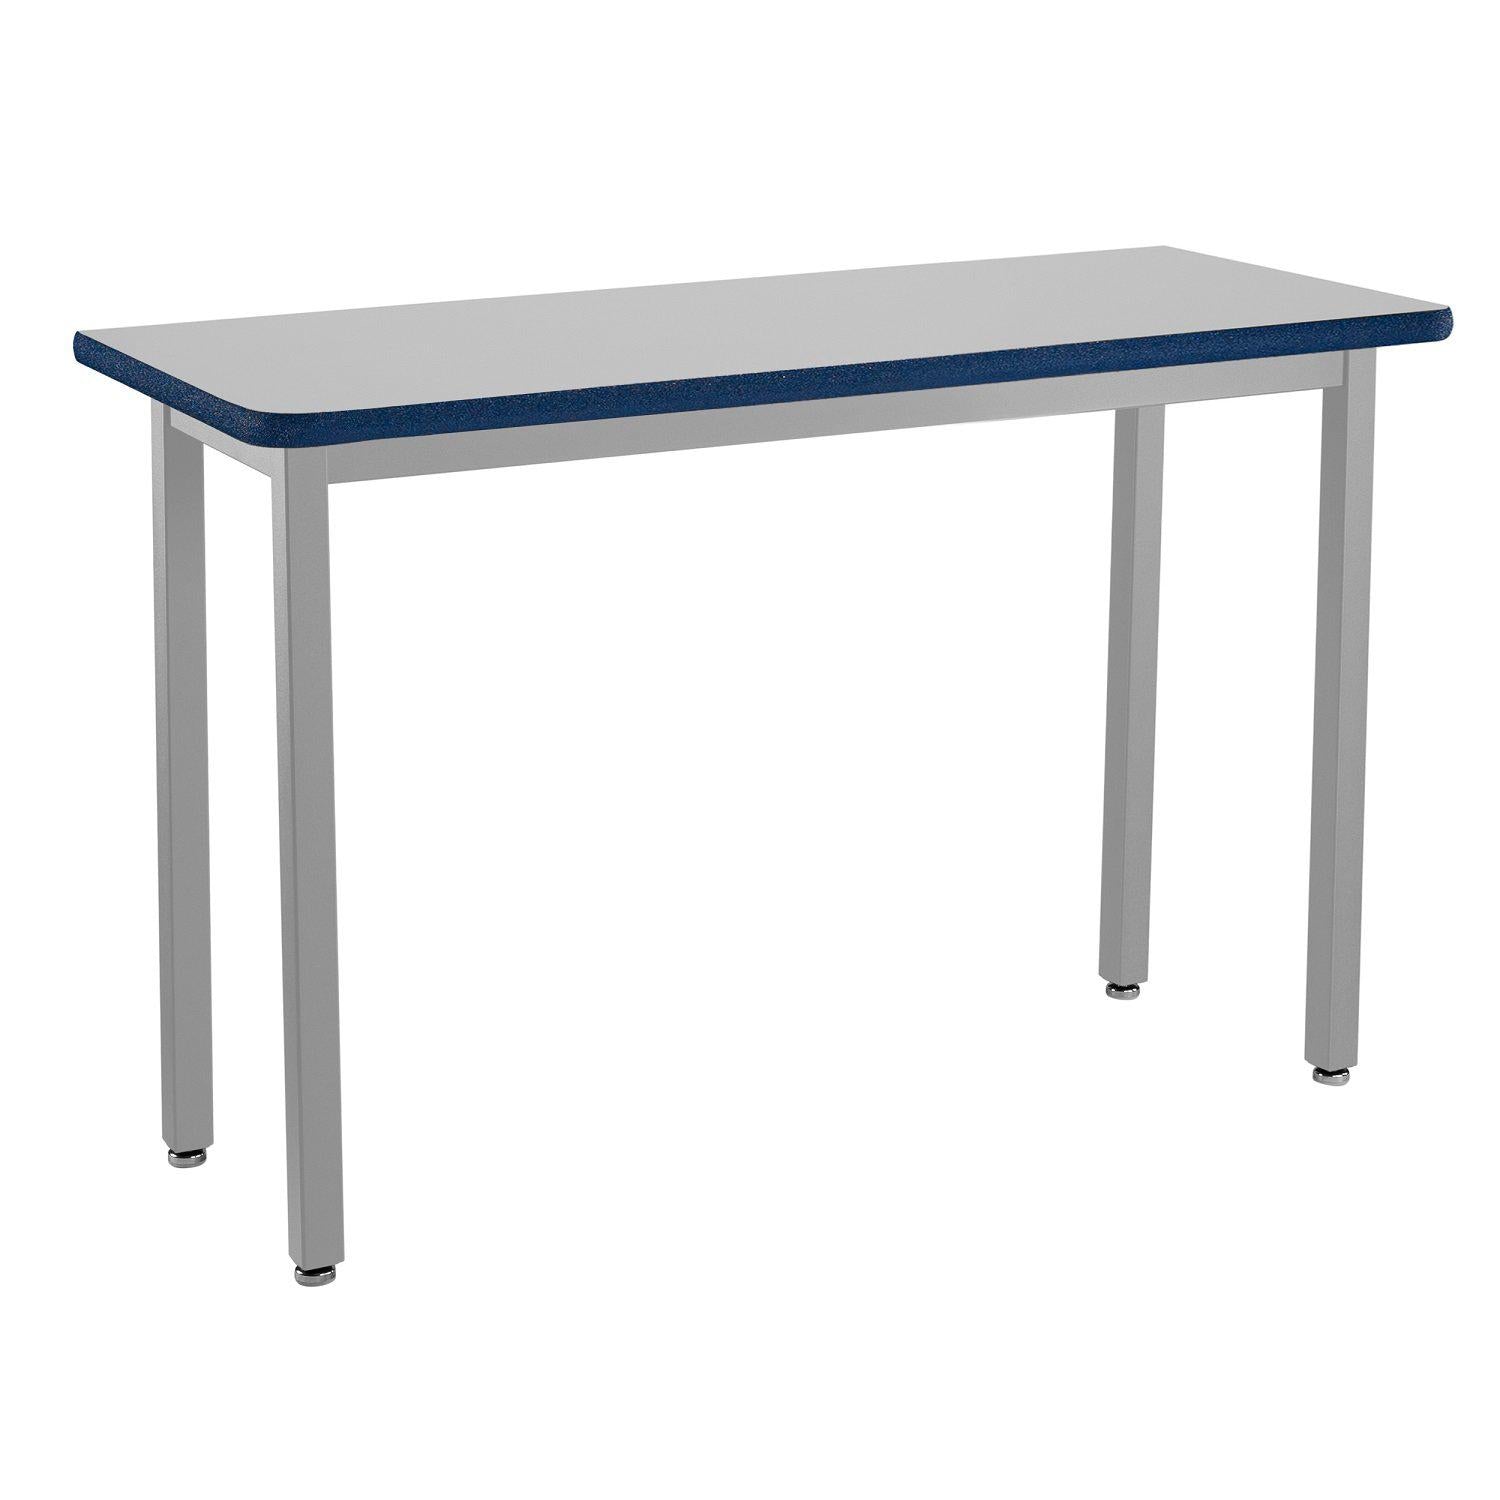 Heavy-Duty Fixed Height Utility Table, Soft Grey Frame, 18" x 48", Supreme High-Pressure Laminate Top with Black ProtectEdge